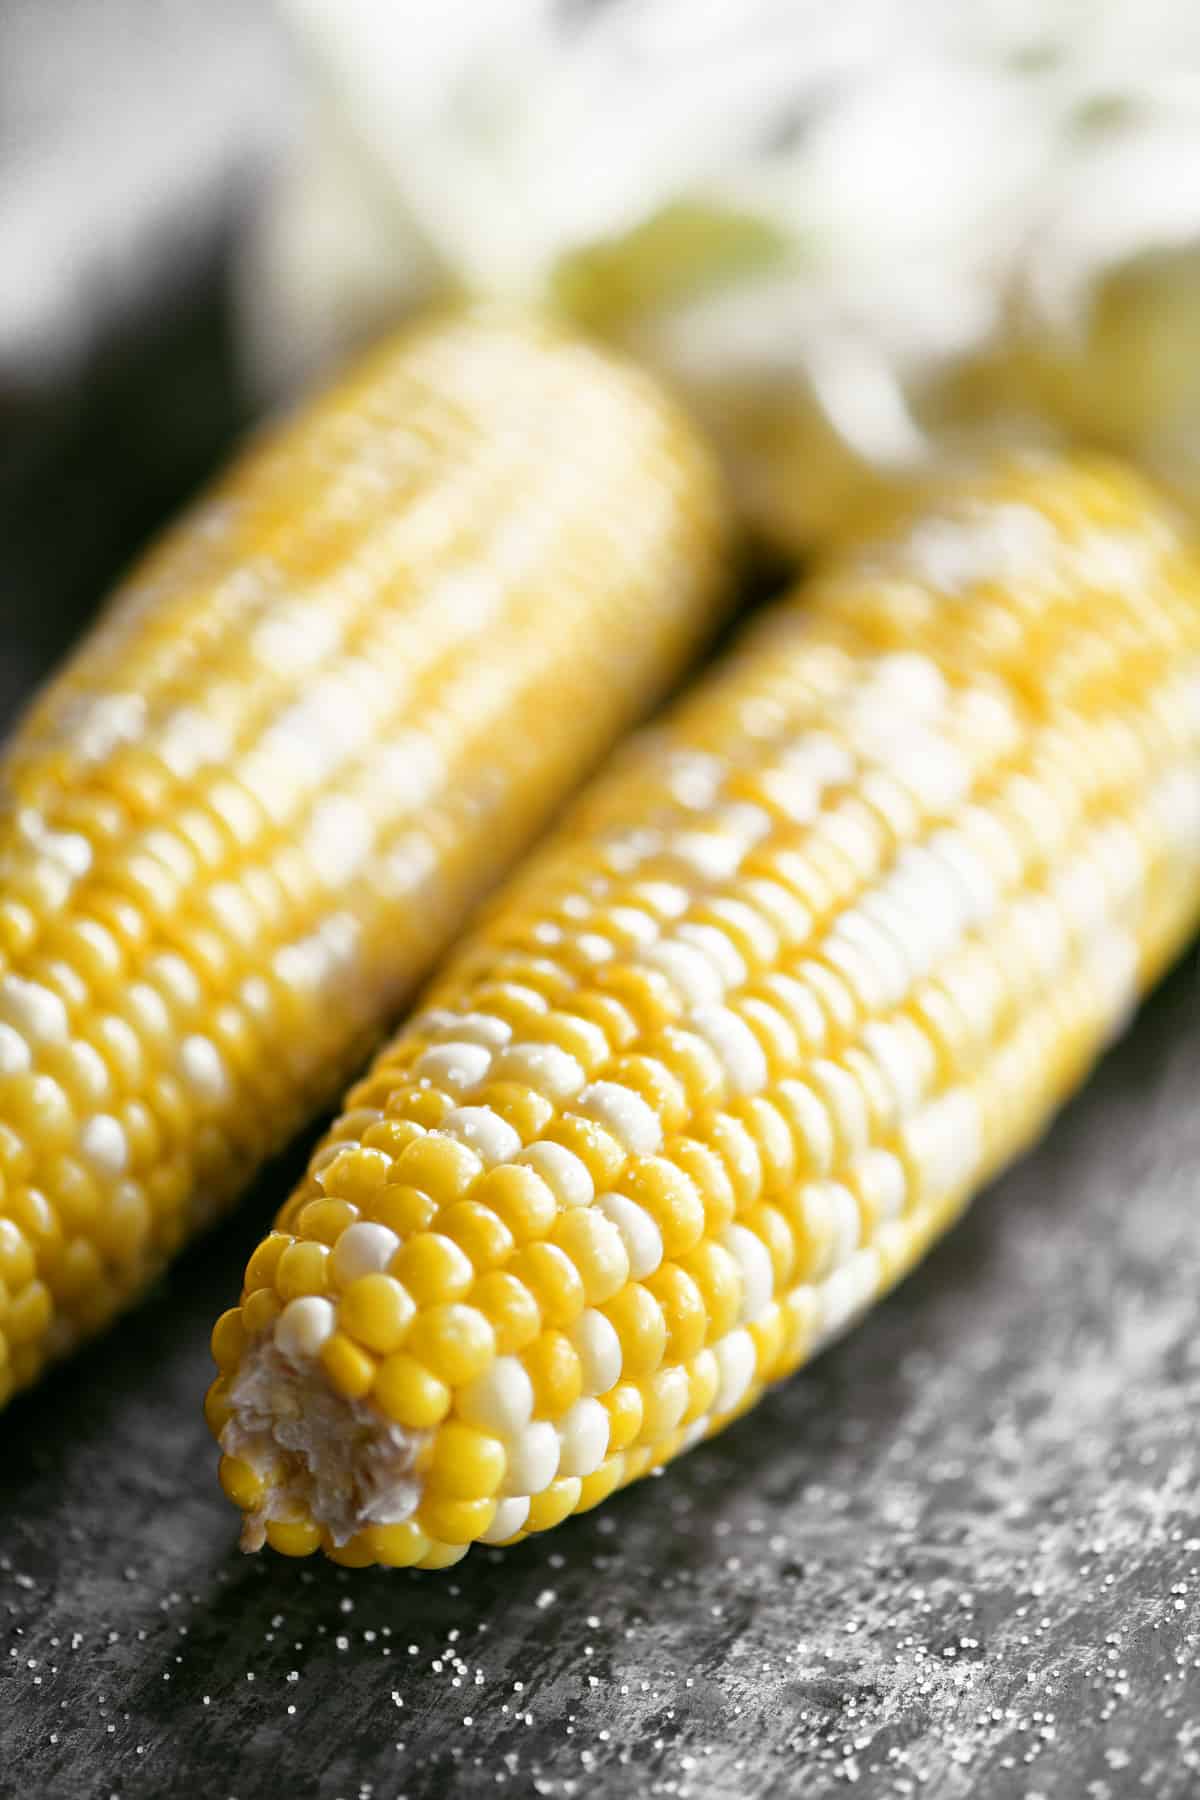 Two corn on the cob.